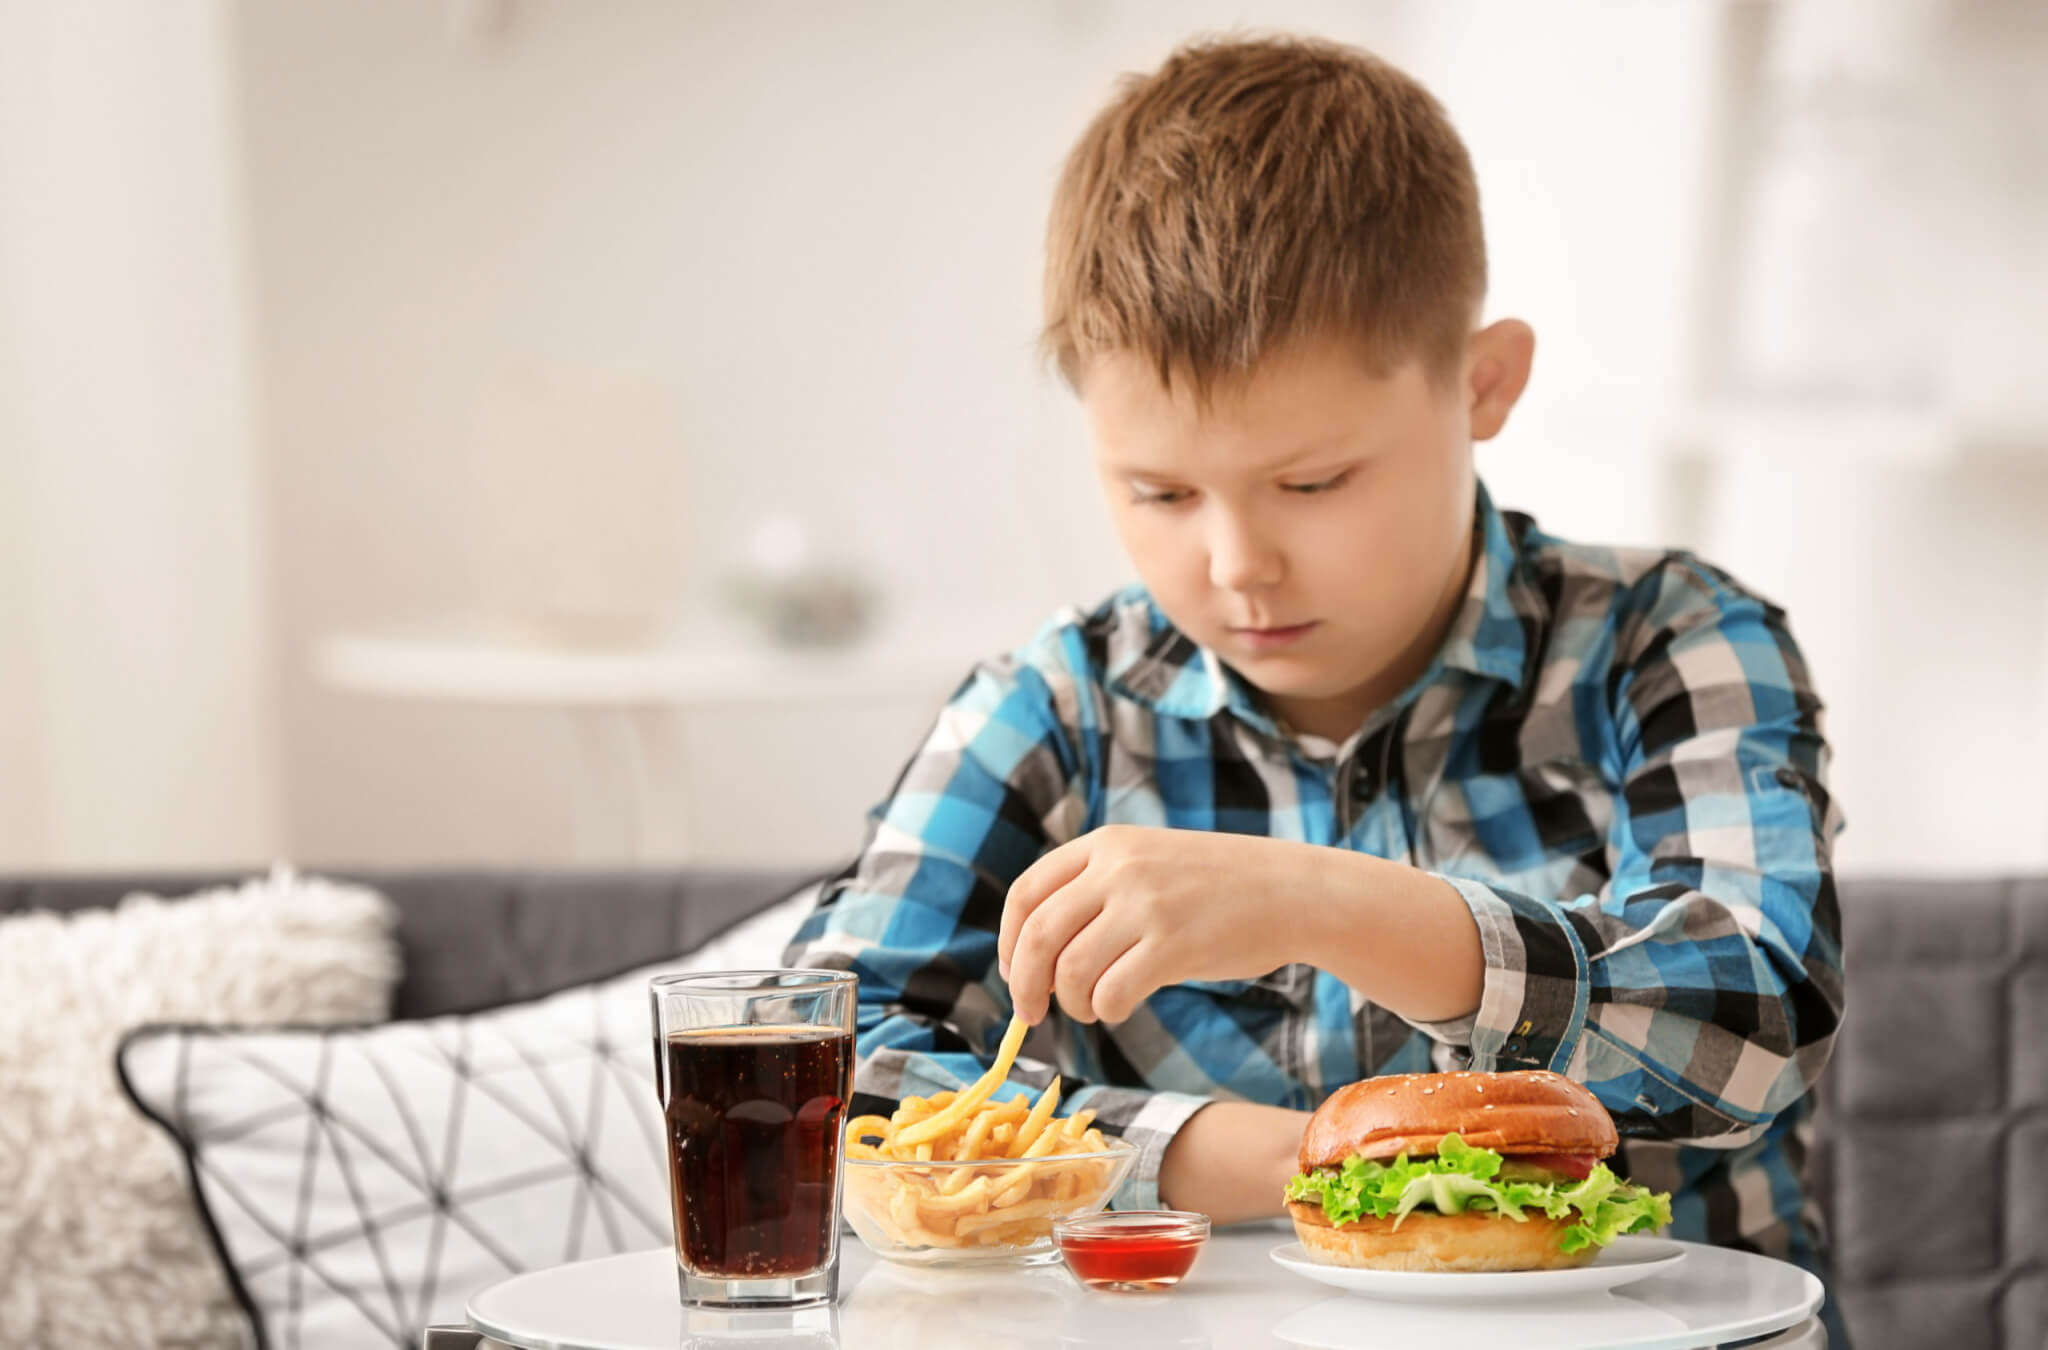 Child eating fast food at home